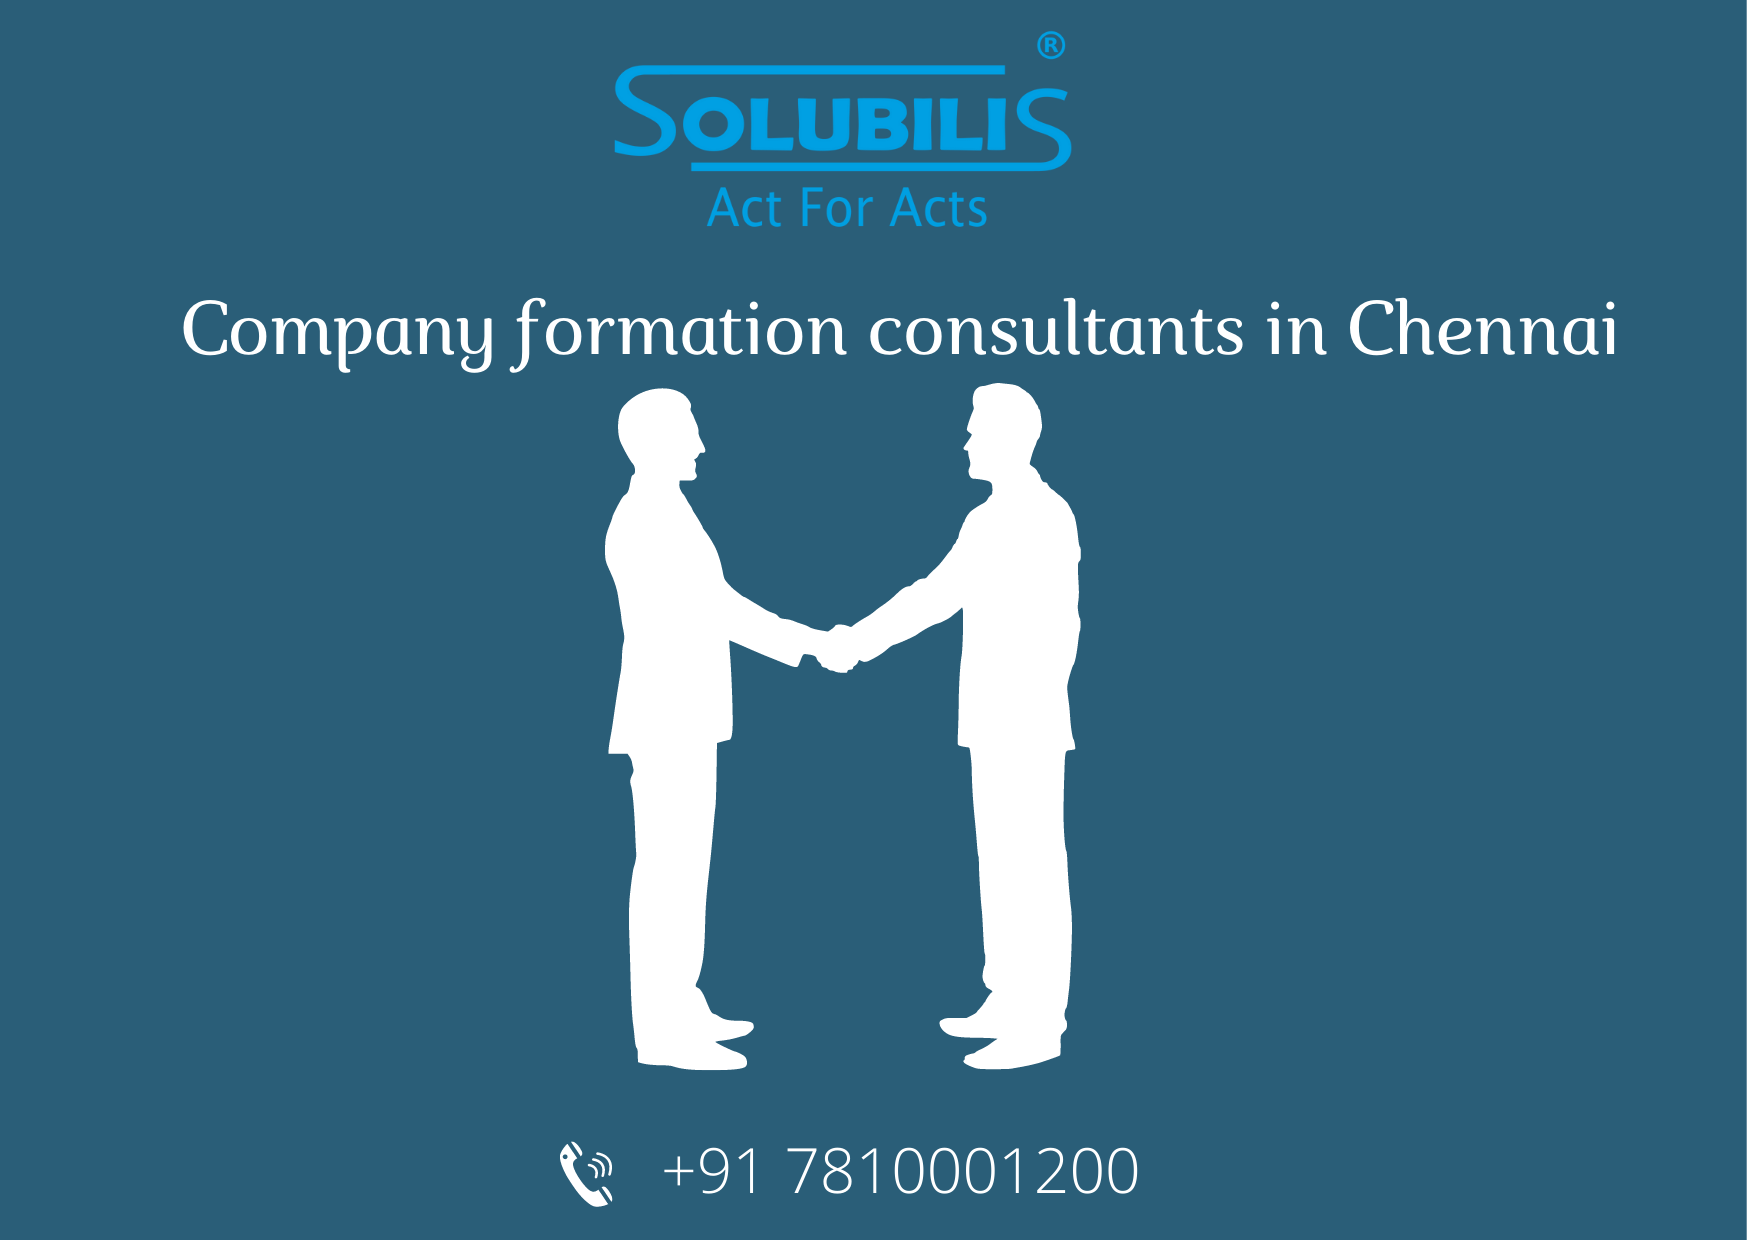 Company formation consultants in Chennai